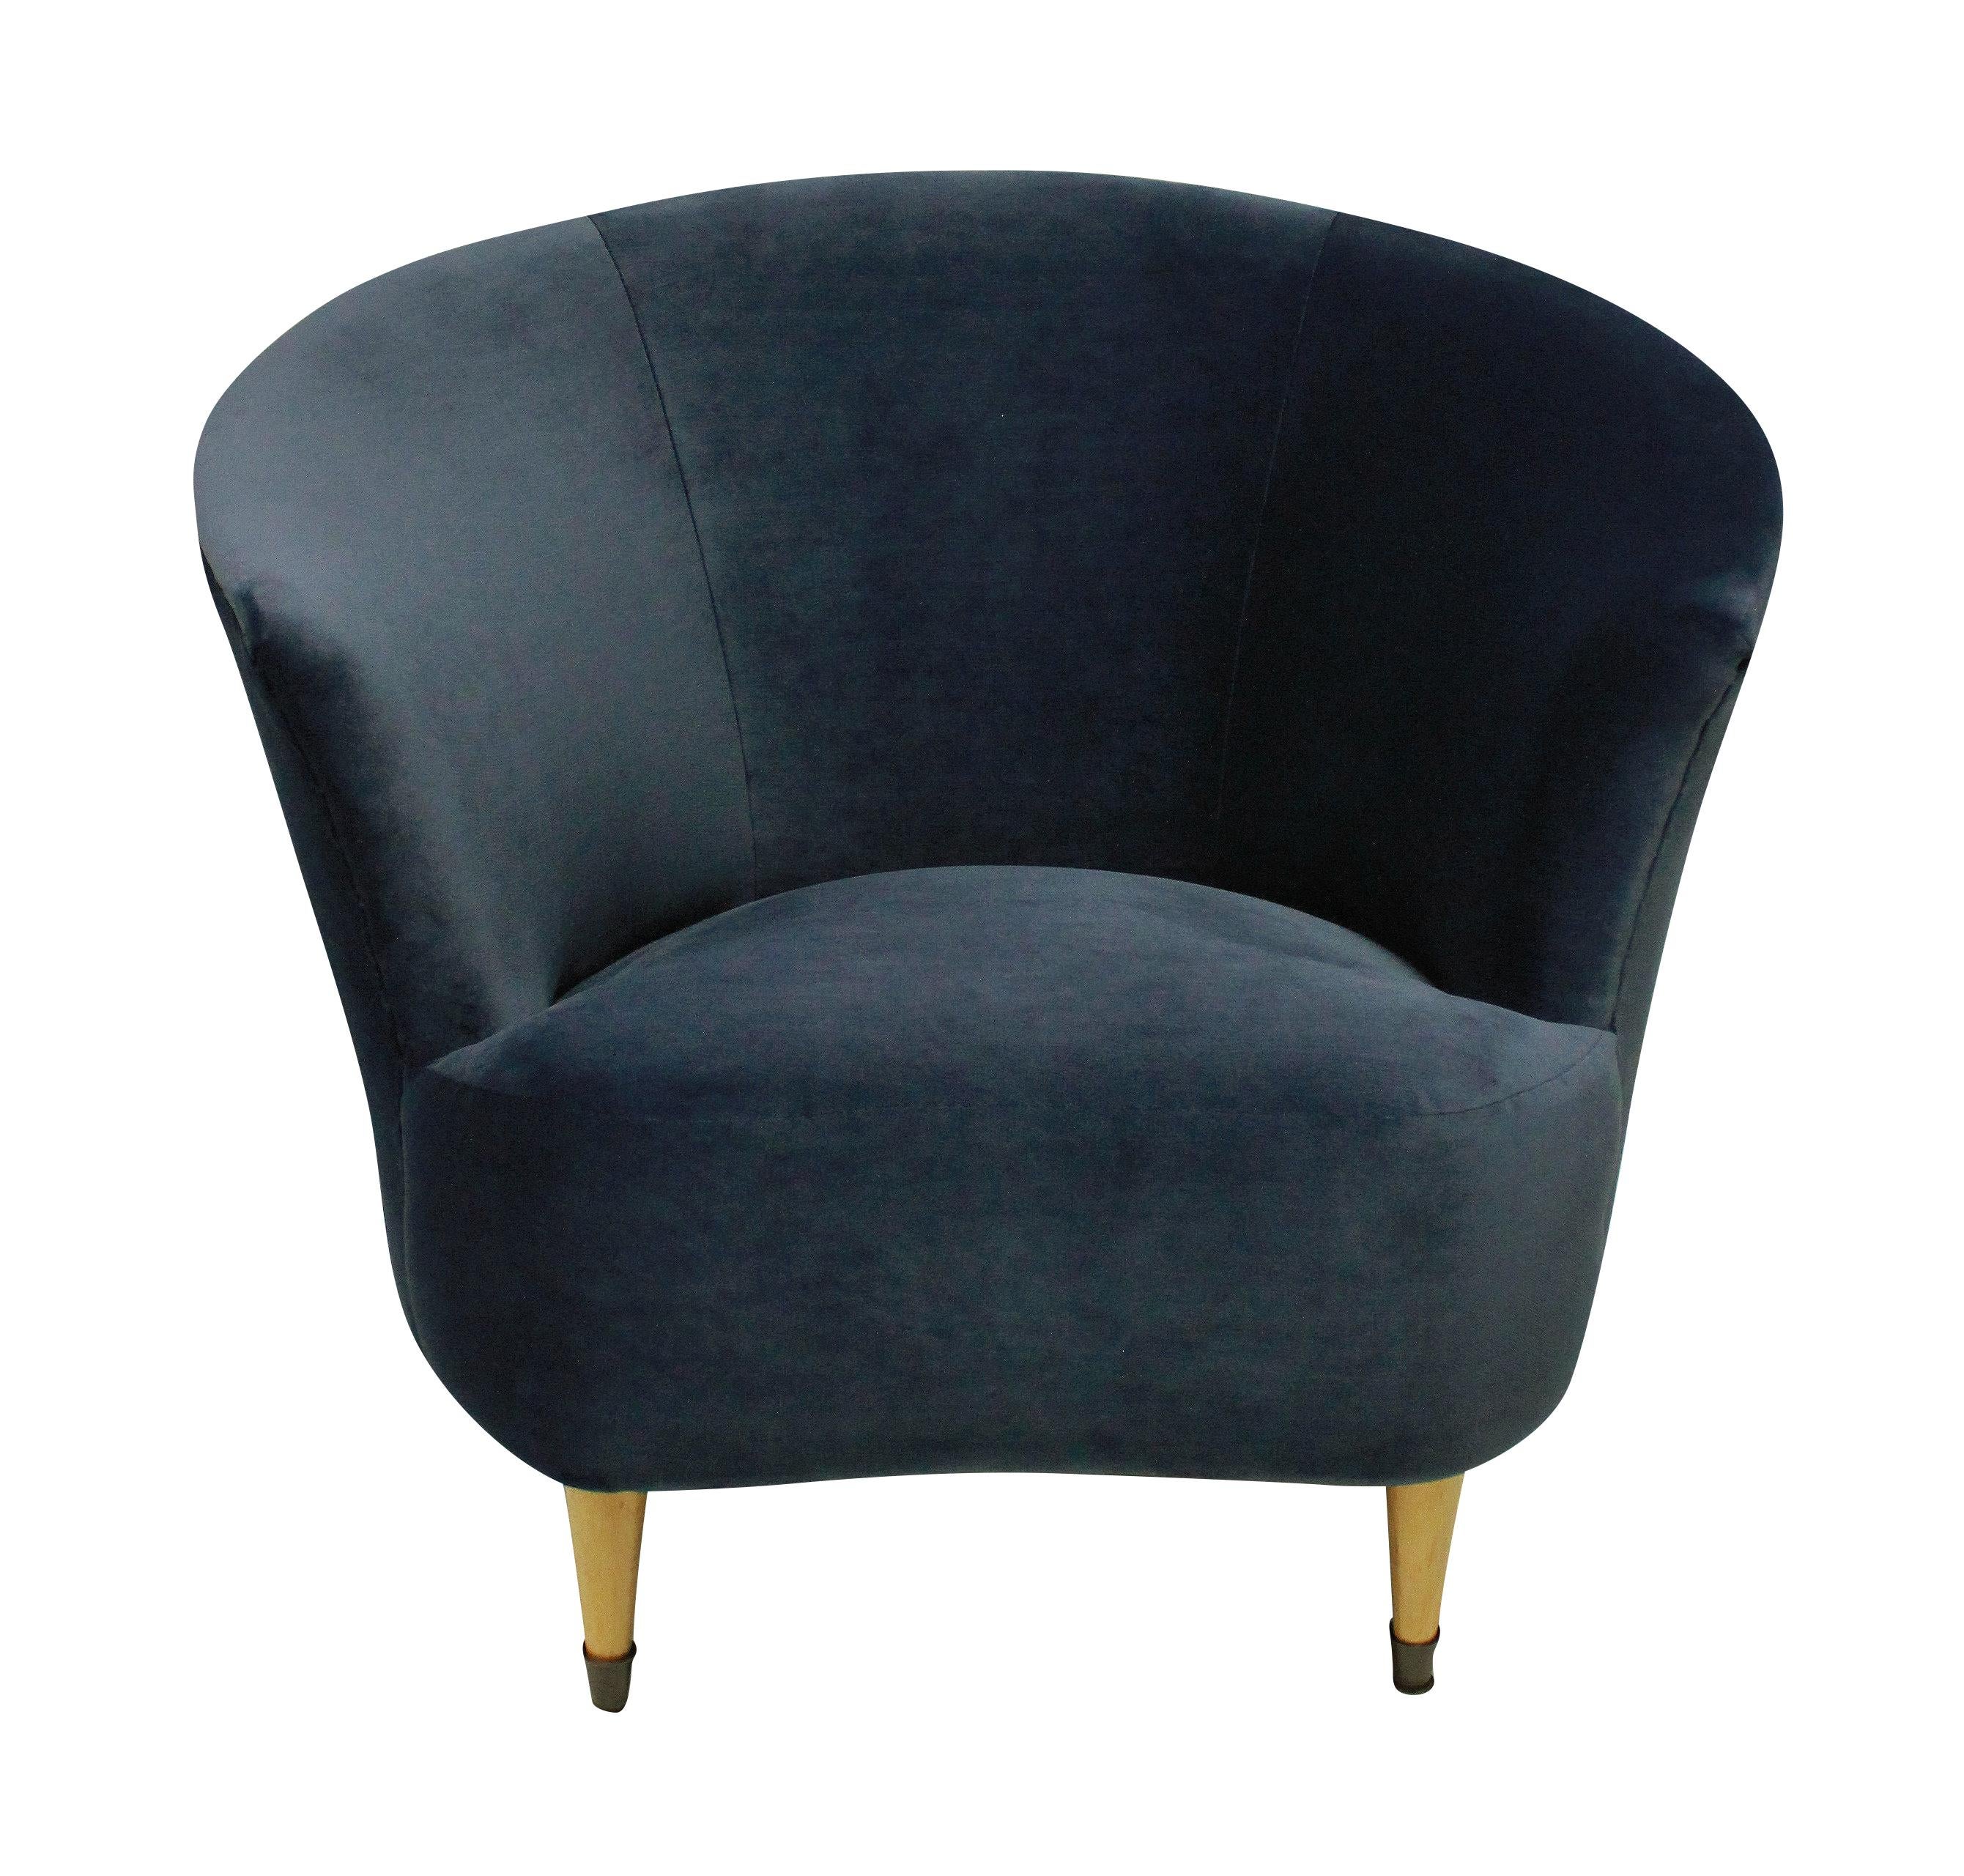 A pair of Ico Parisi cocktail chairs. Two curved armchairs with blond wood turned legs and brass sabot. Newly upholstered in blue velvet.